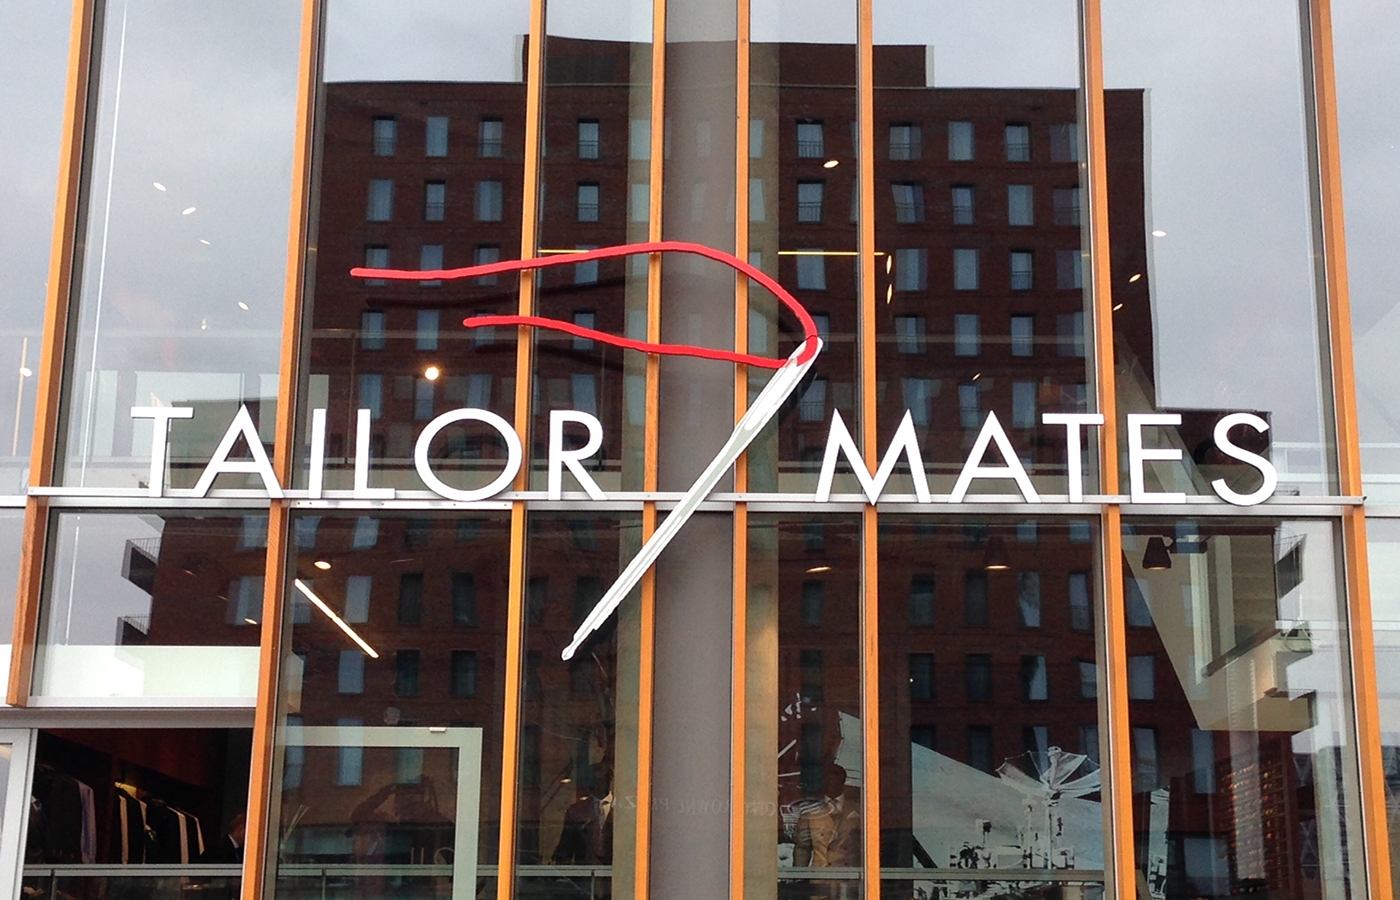 LEDSign project: Tailor Mates